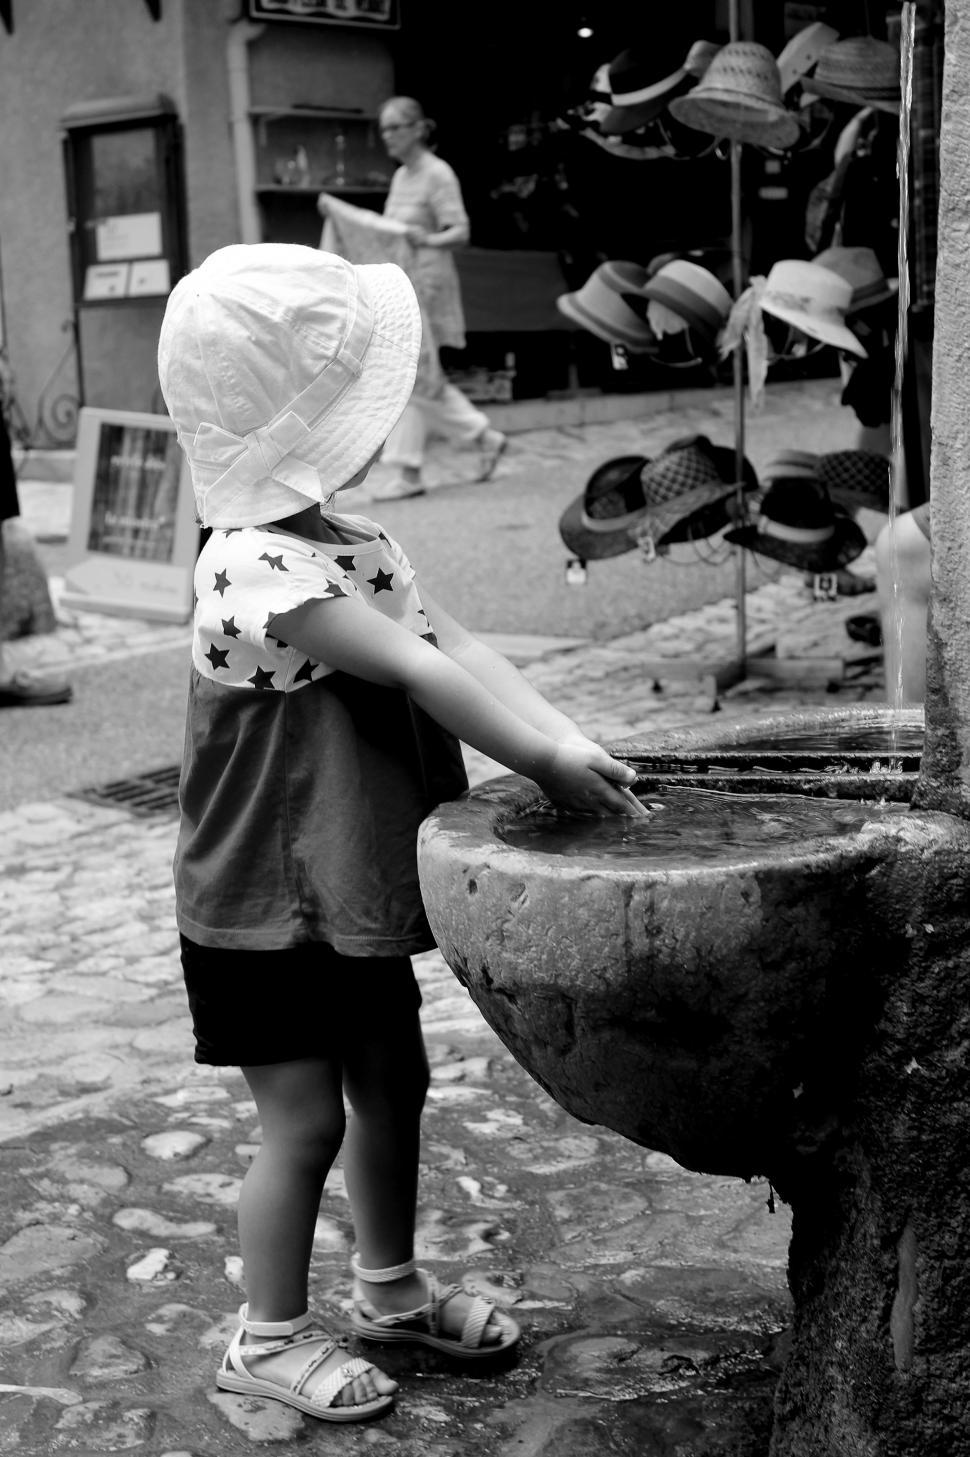 Free Image of Toddler washing her hands while observing hats for sale in Moust 